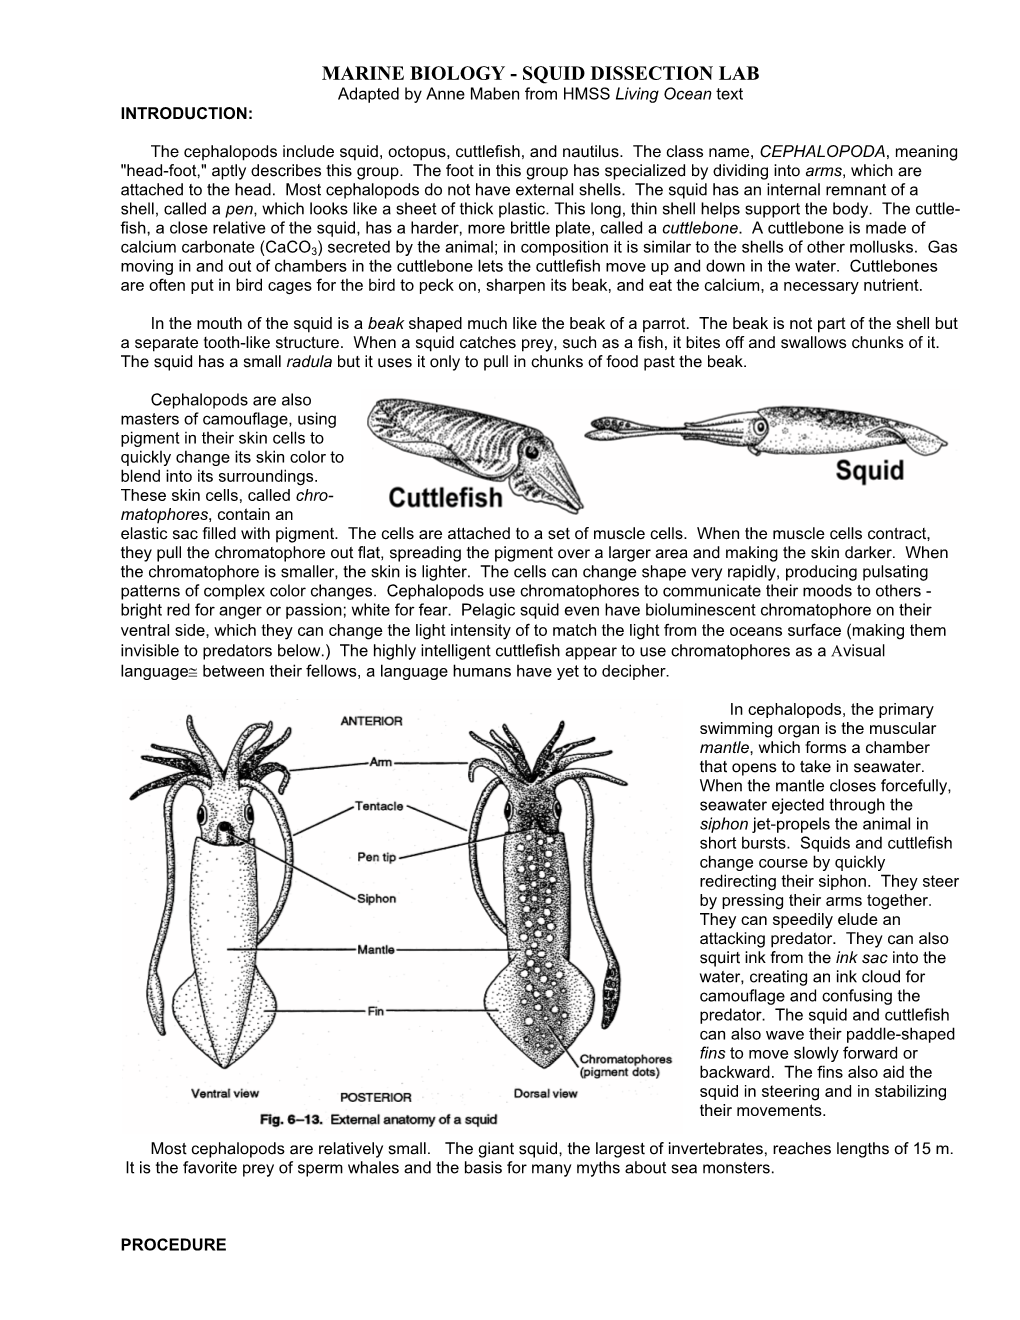 MARINE BIOLOGY - SQUID DISSECTION LAB Adapted by Anne Maben from HMSS Living Ocean Text INTRODUCTION